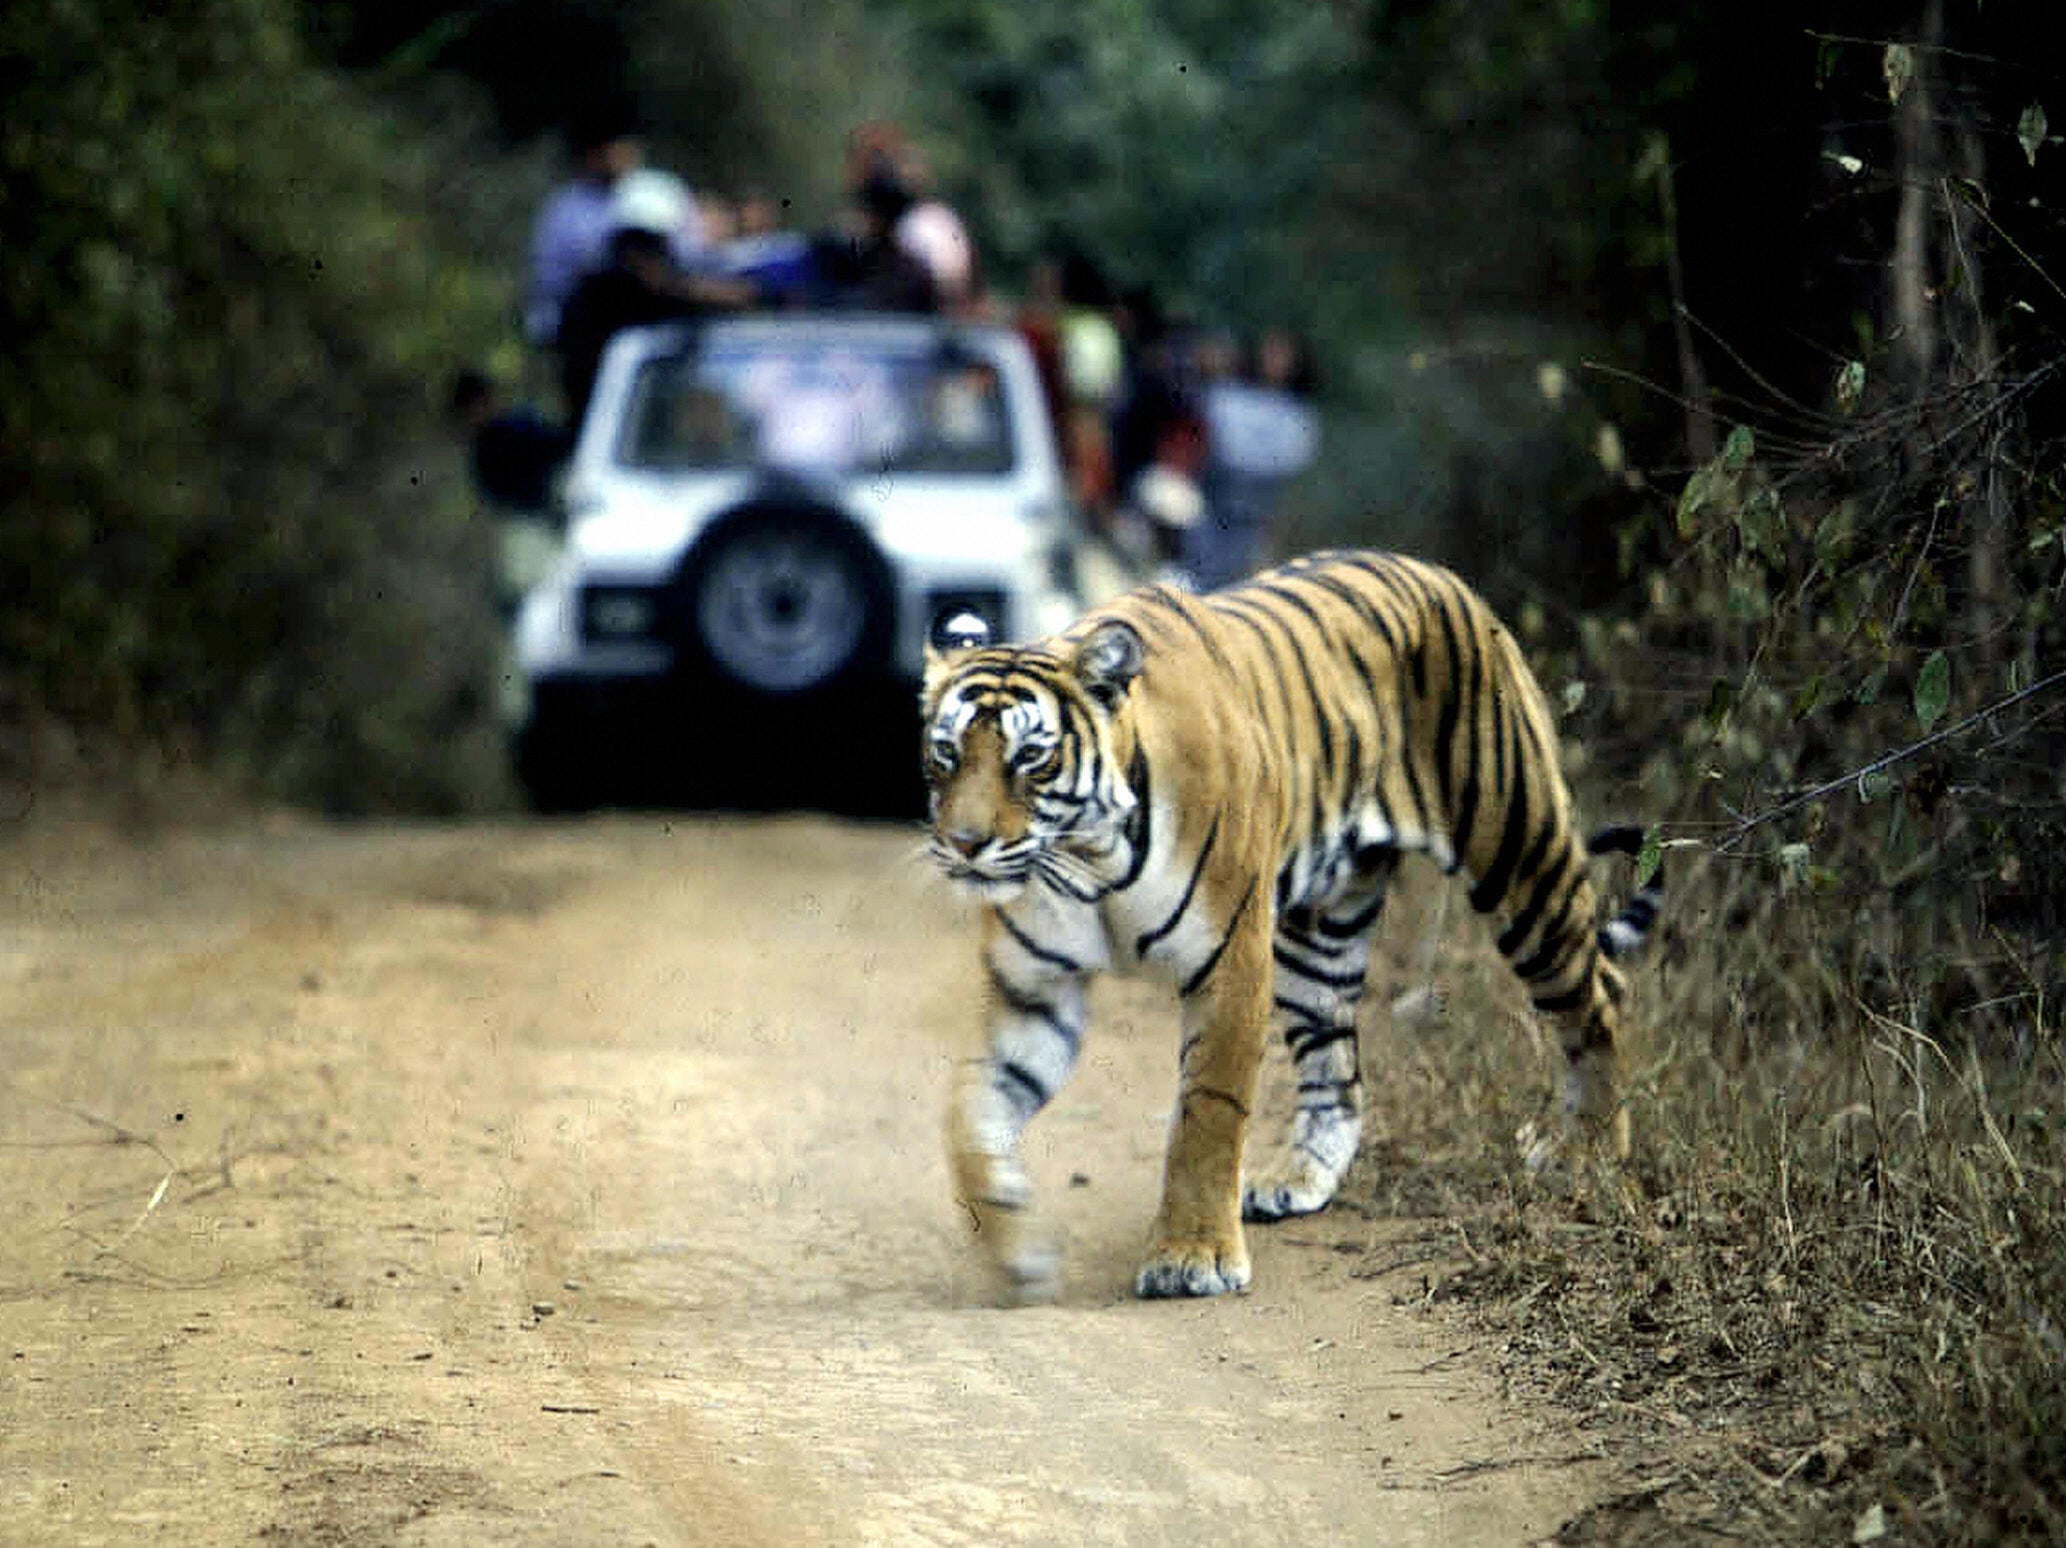 File. A tiger crossing a road in the Ranthambore National Park in India’s northwestern Rajasthan